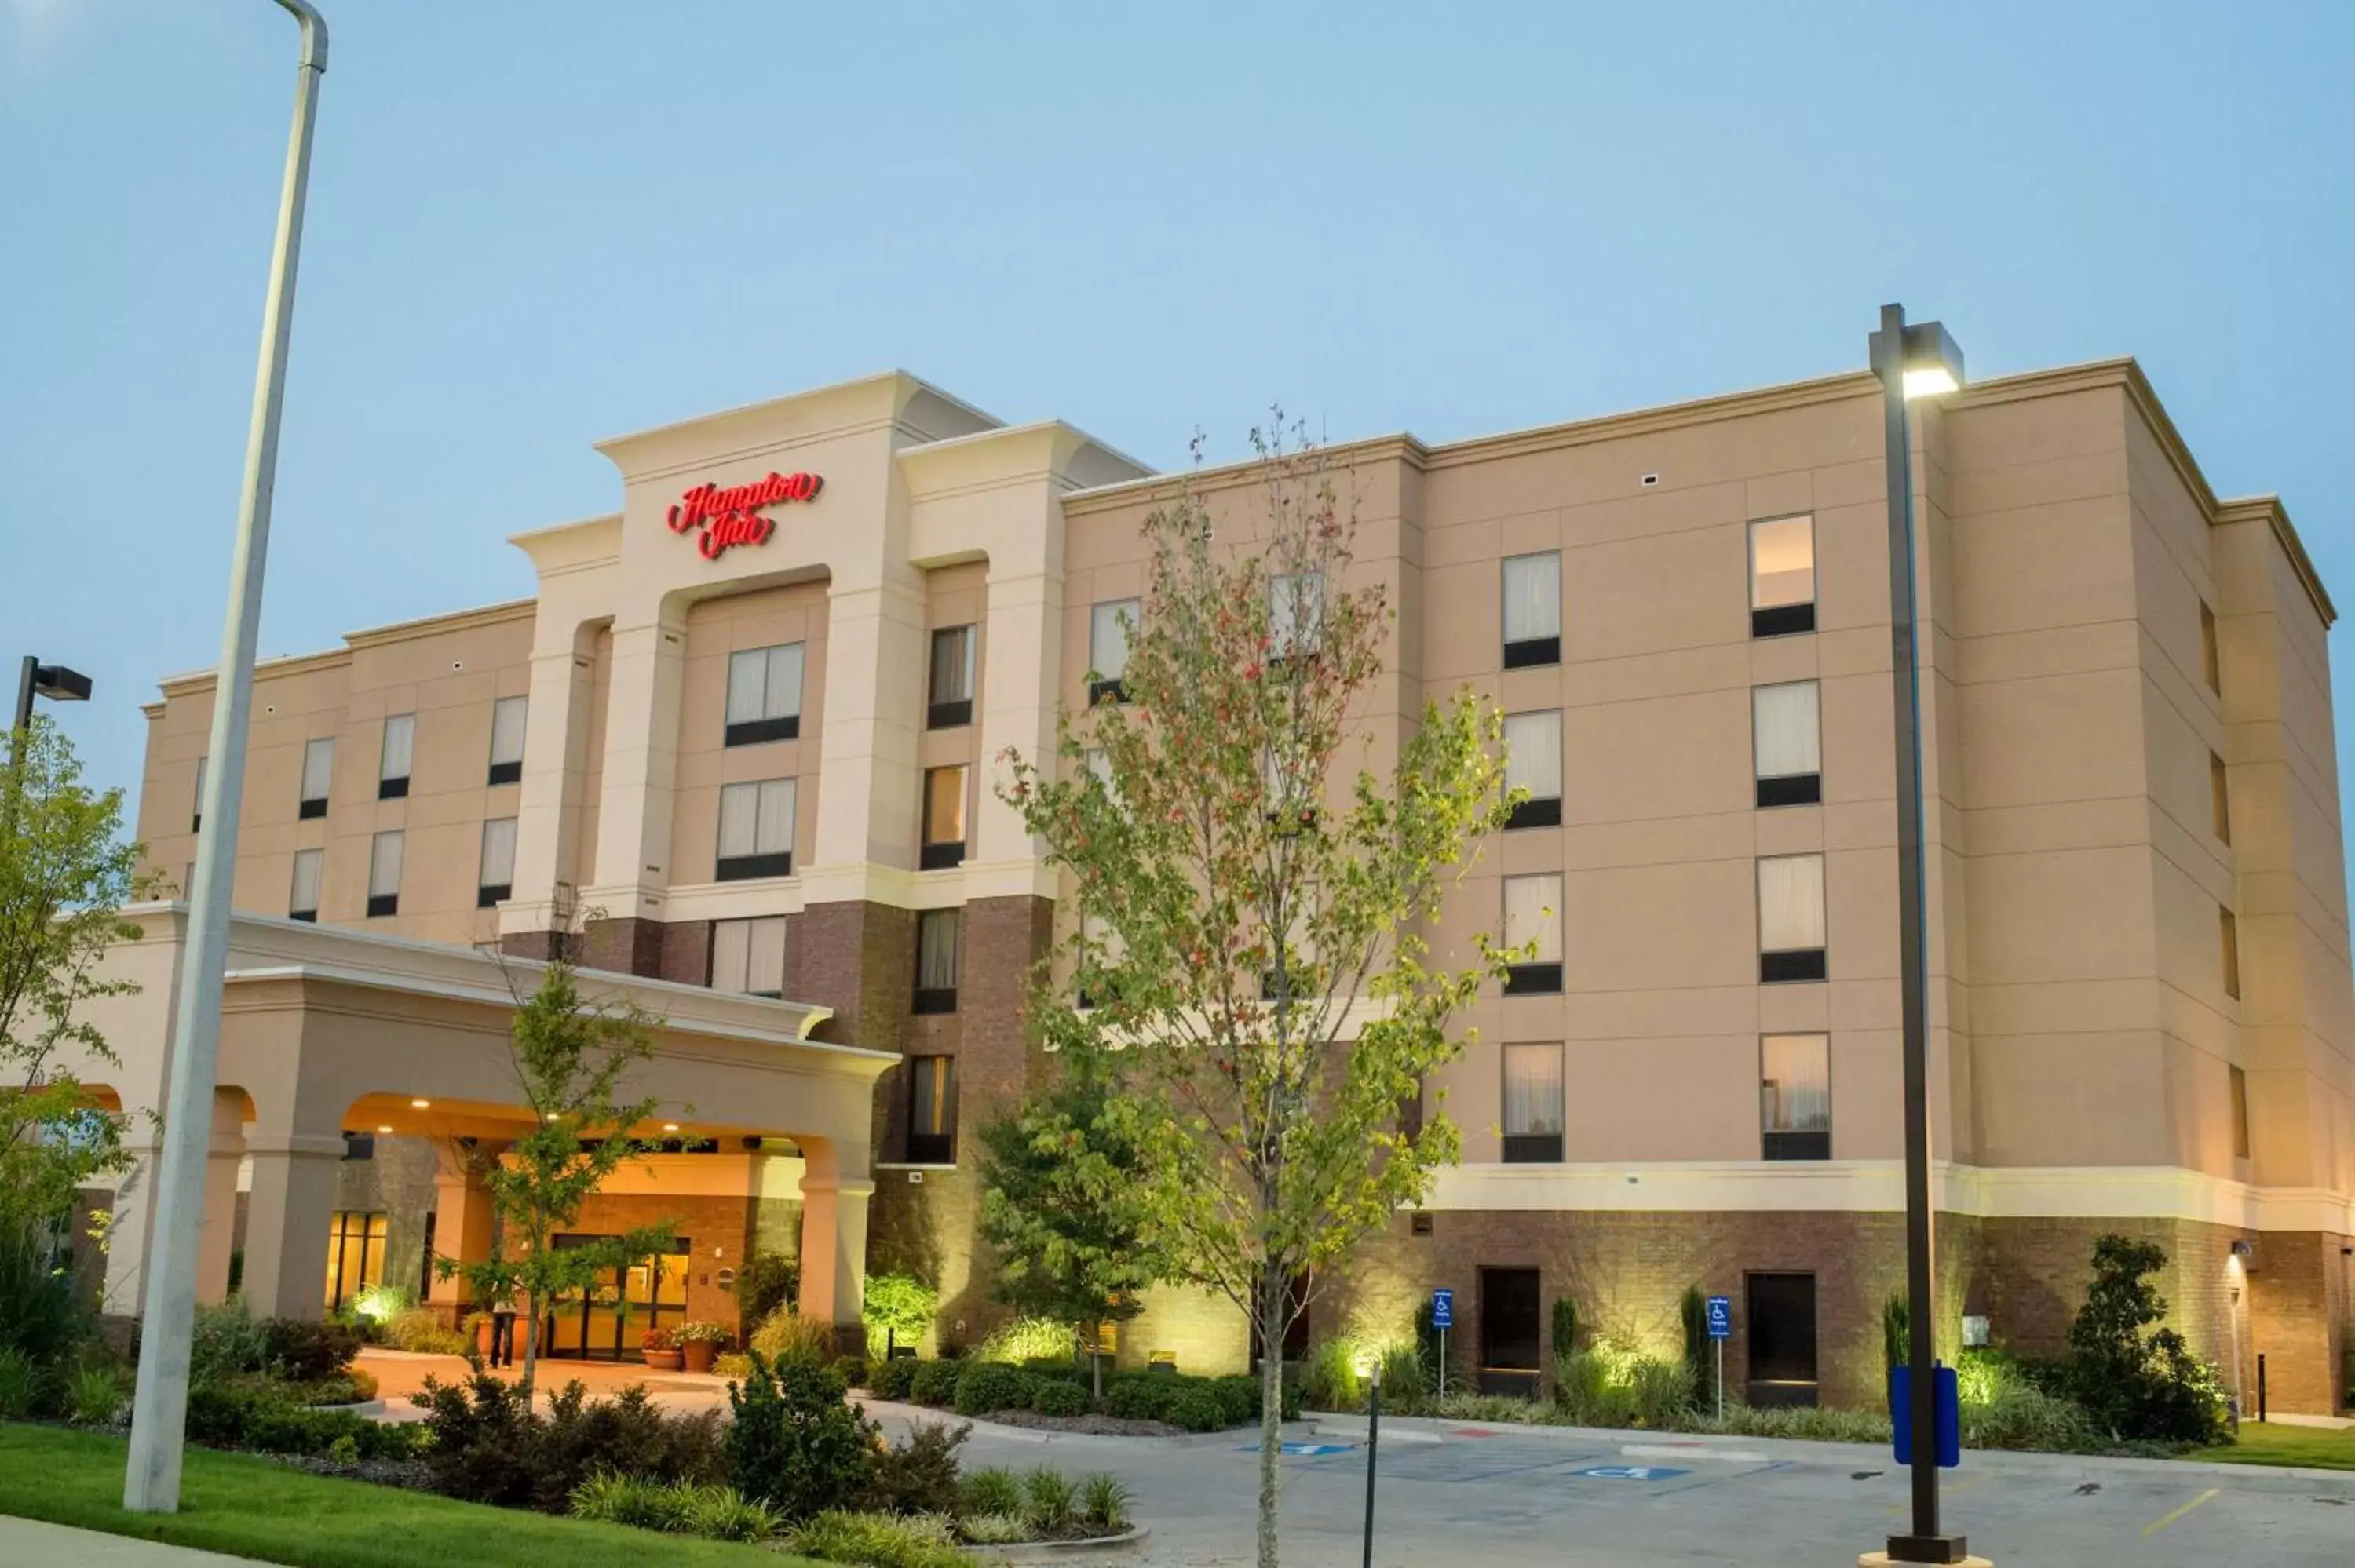 Property Building in Hampton Inn Oxford/Conference Center